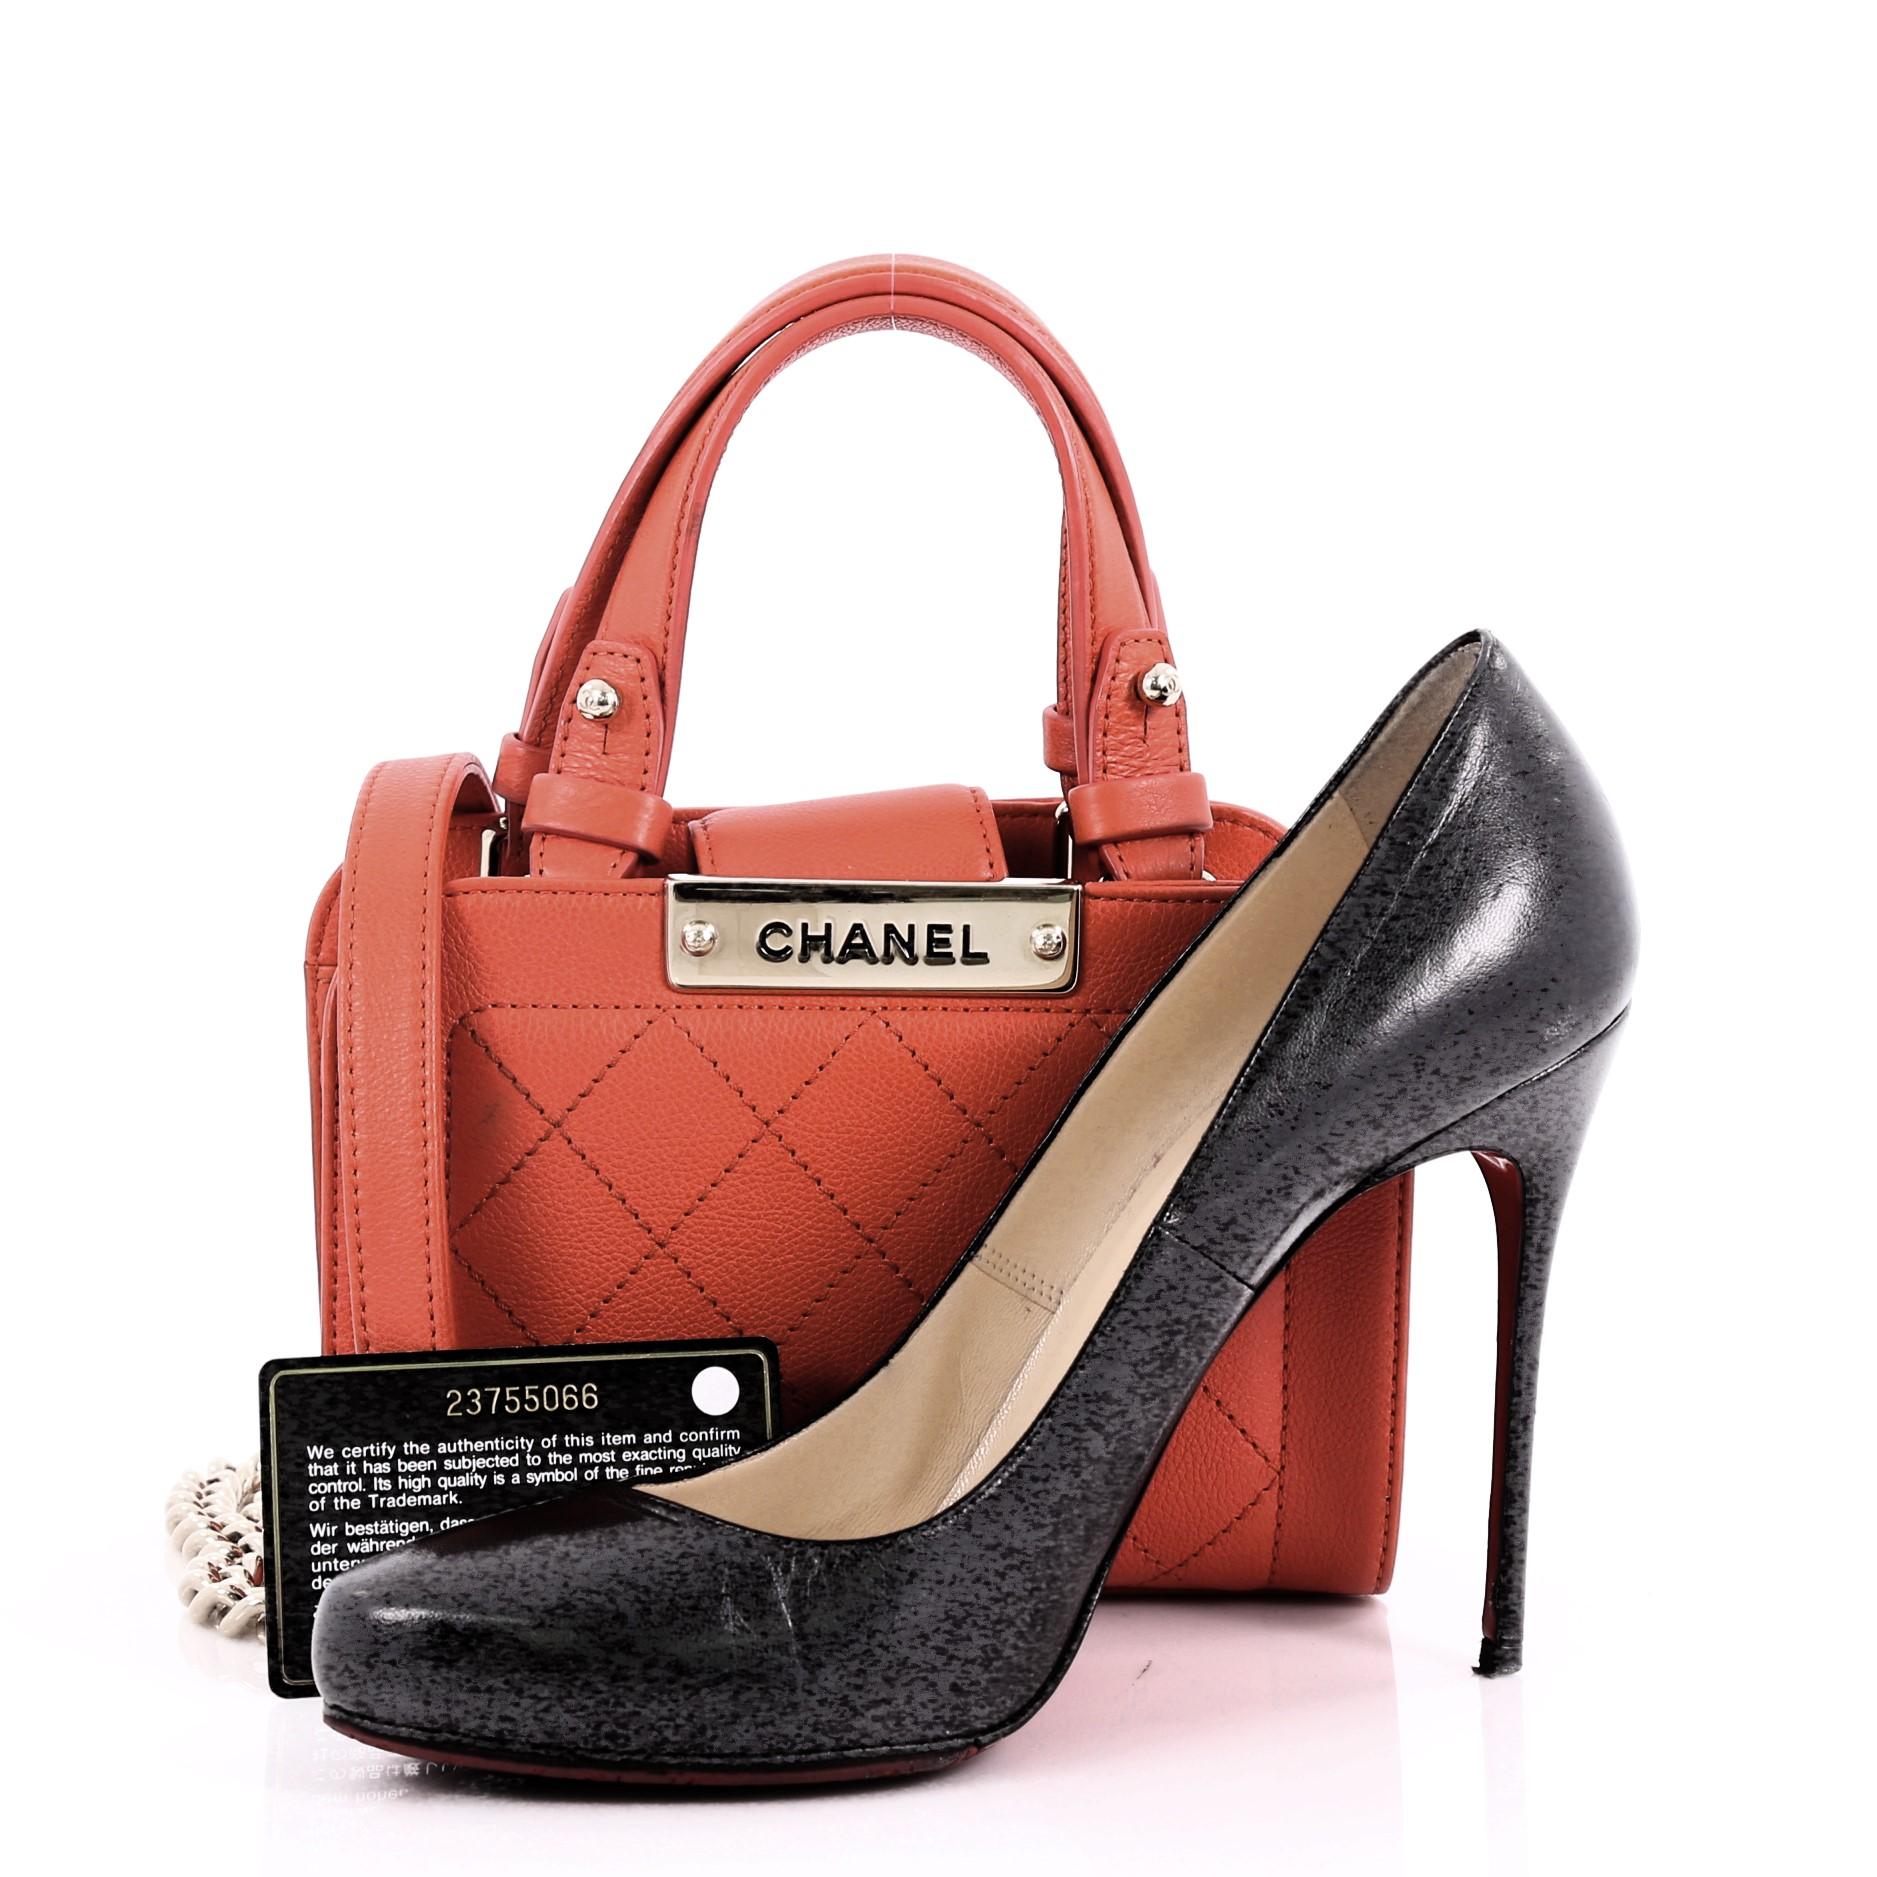 This Chanel Label Click Shopping Tote Quilted Calfskin Mini, crafted in red orange quilted calfskin leather, features dual flat leather handles, chunky chain link strap with leather pads, and gold-tone hardware. Its magnetic snap closure opens to a